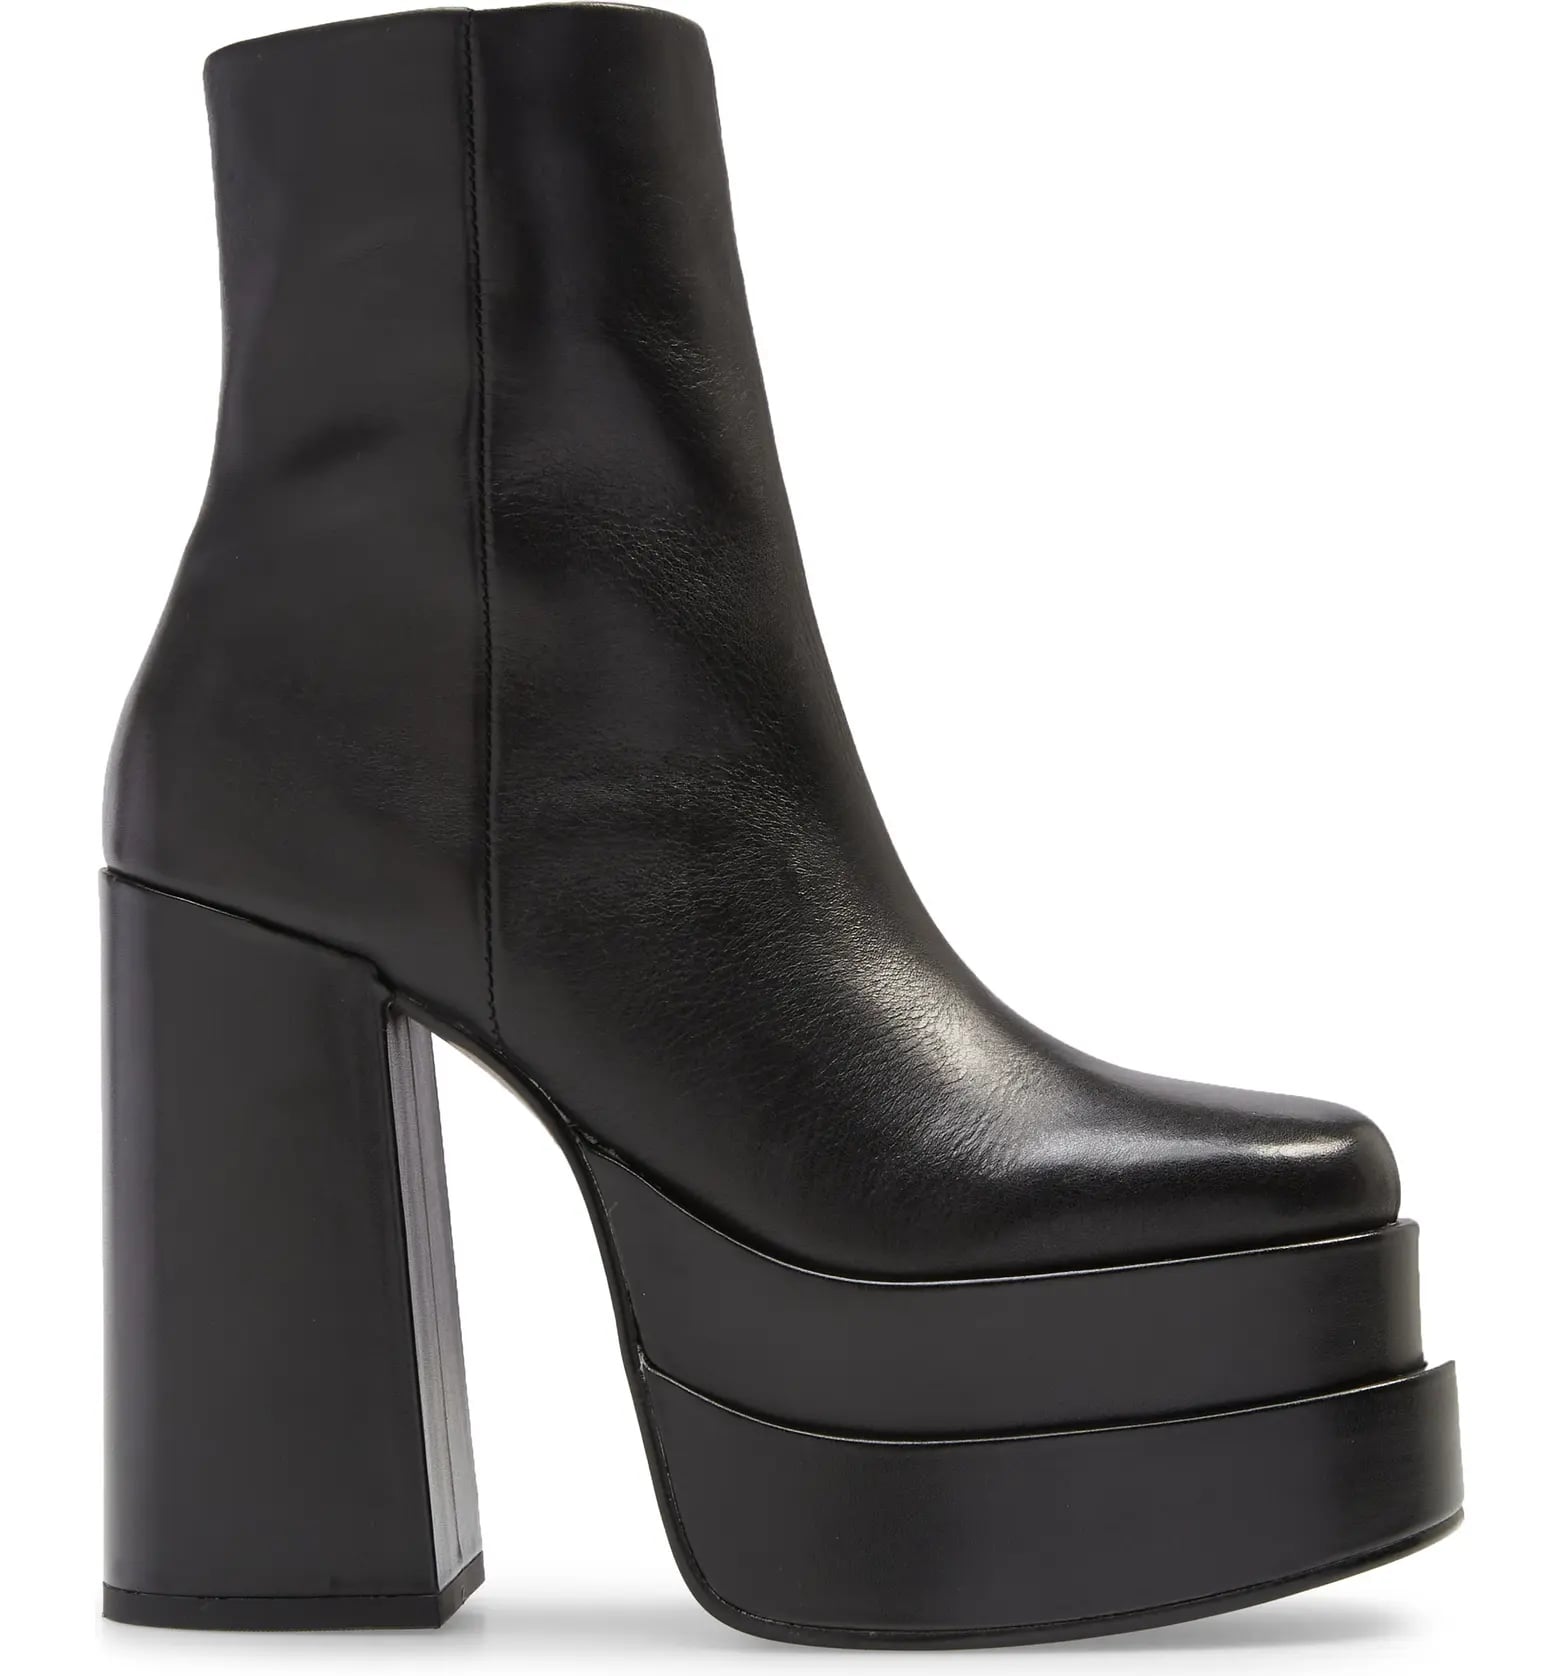 Steve Madden Cobra Boot in Black - www.myassignmentservices.com.au